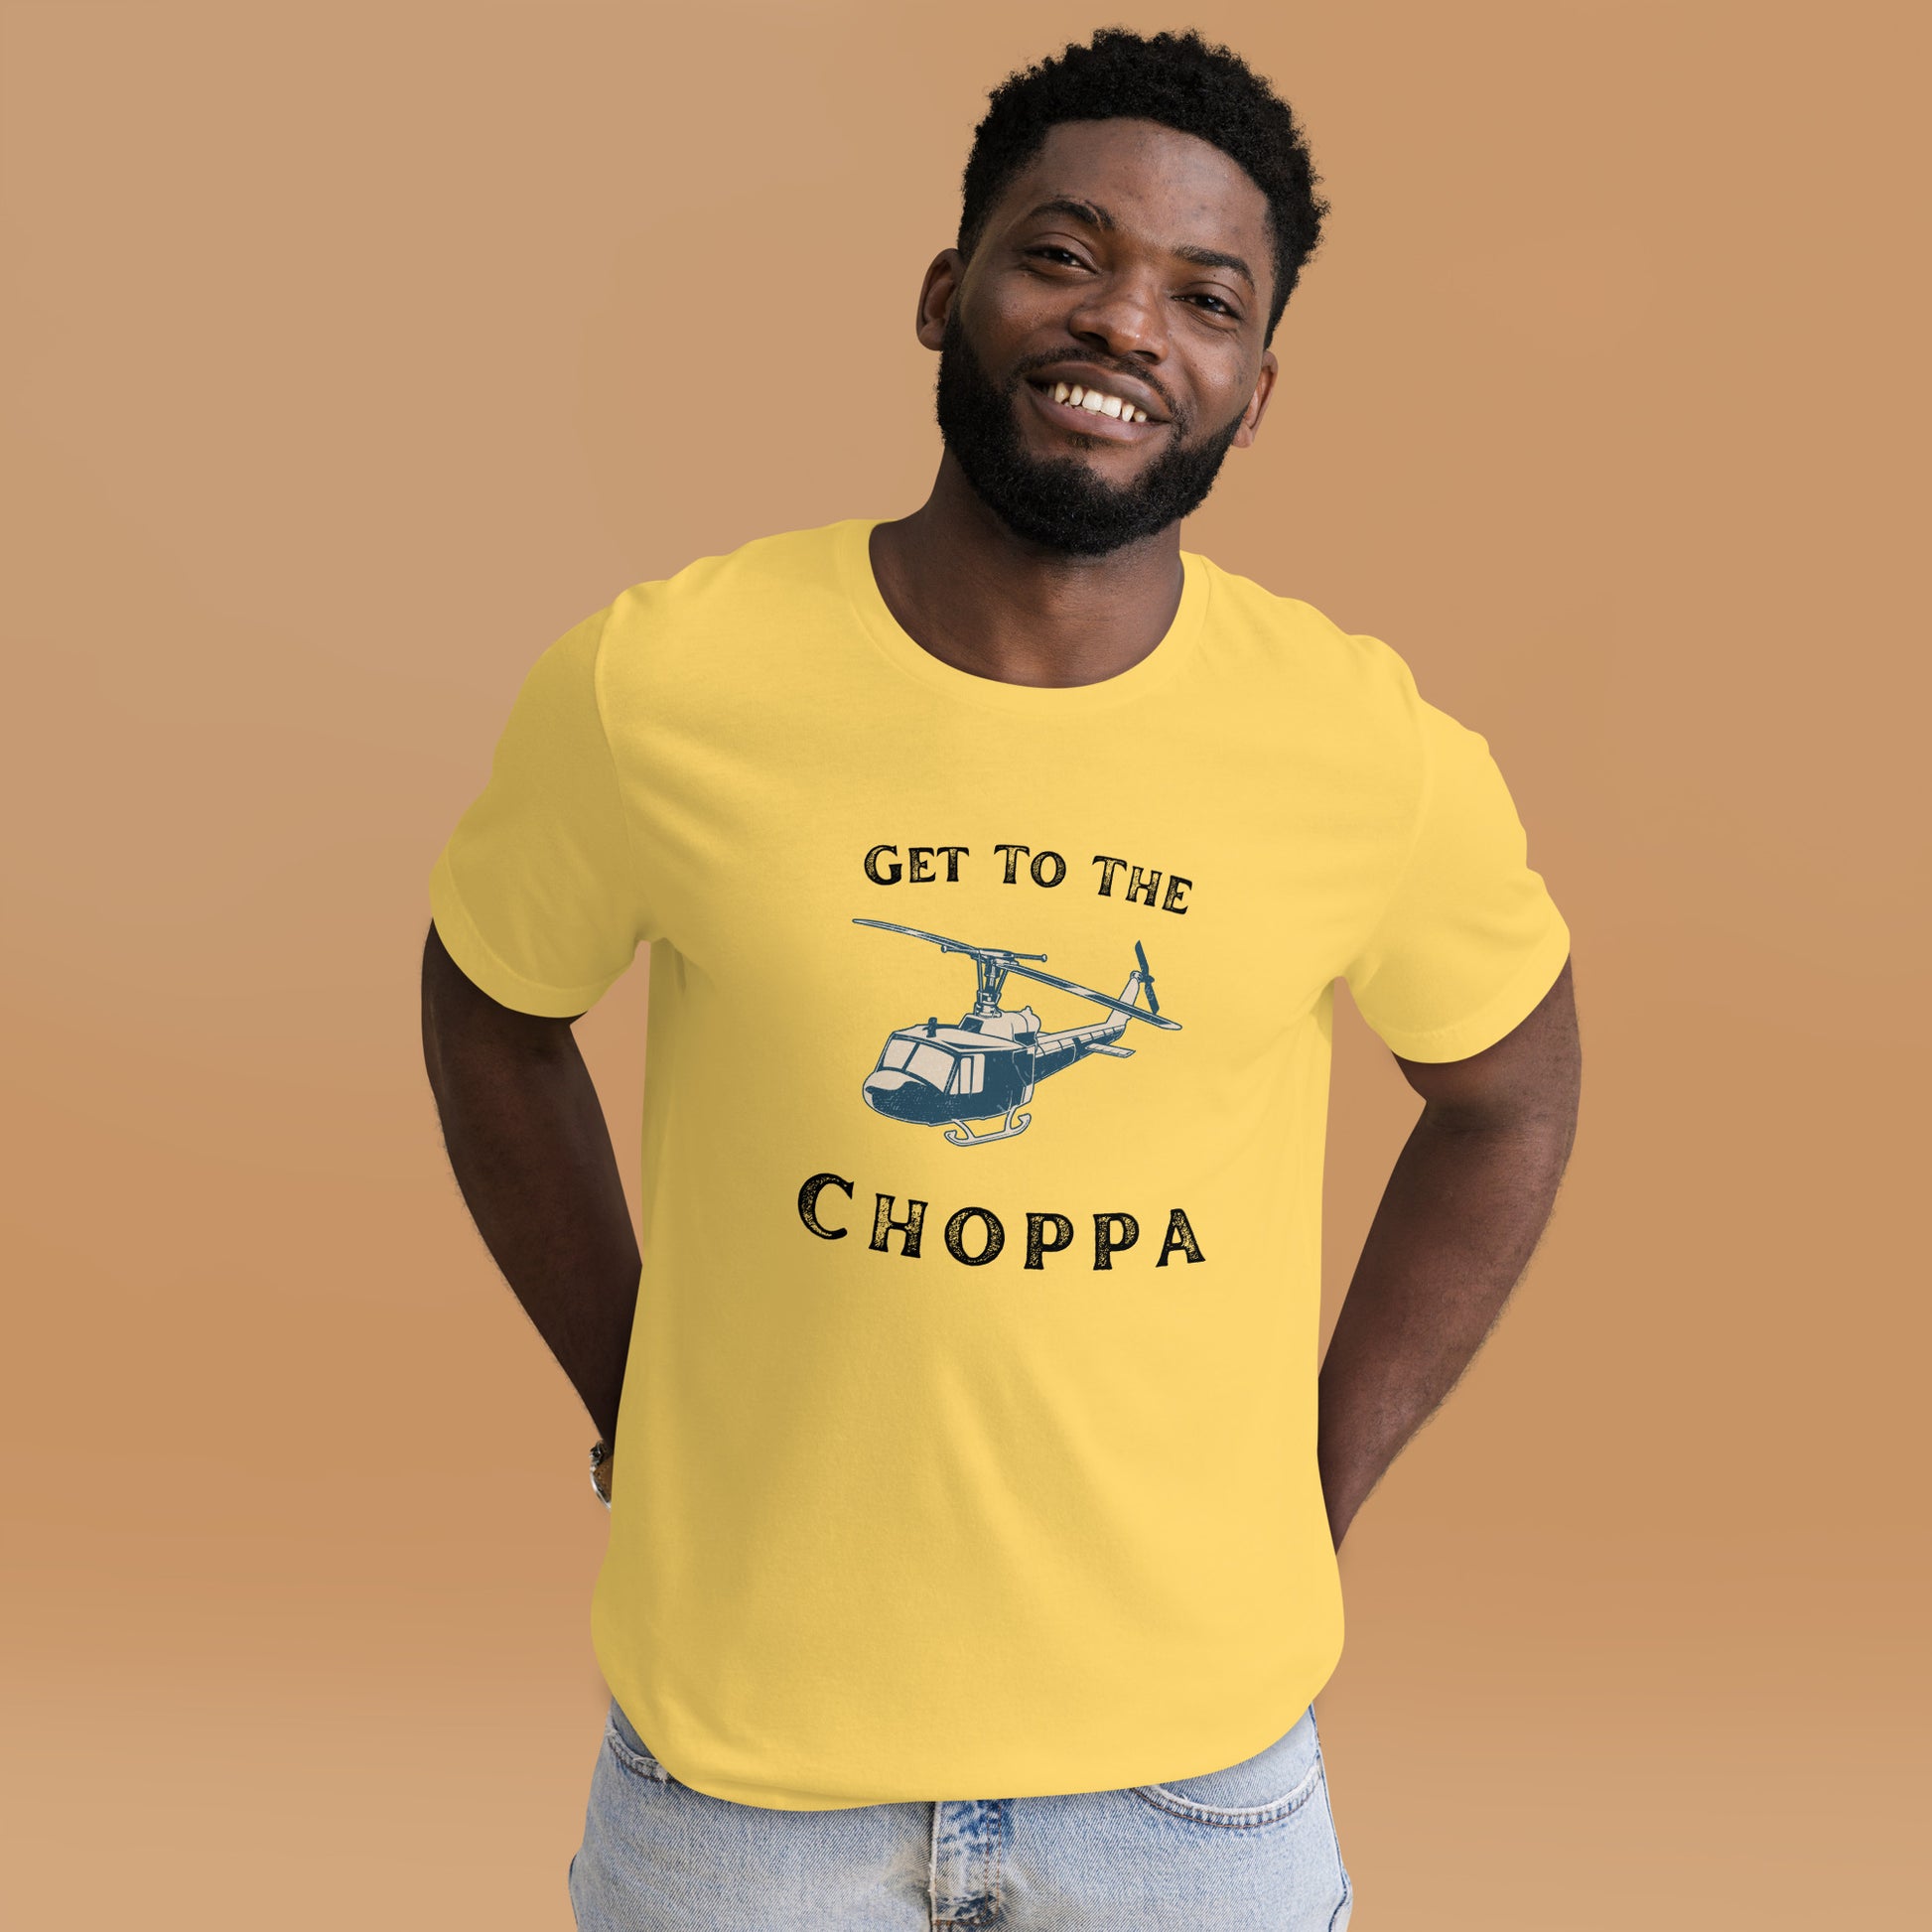 "Get To The Choppa" T-Shirt - Weave Got Gifts - Unique Gifts You Won’t Find Anywhere Else!